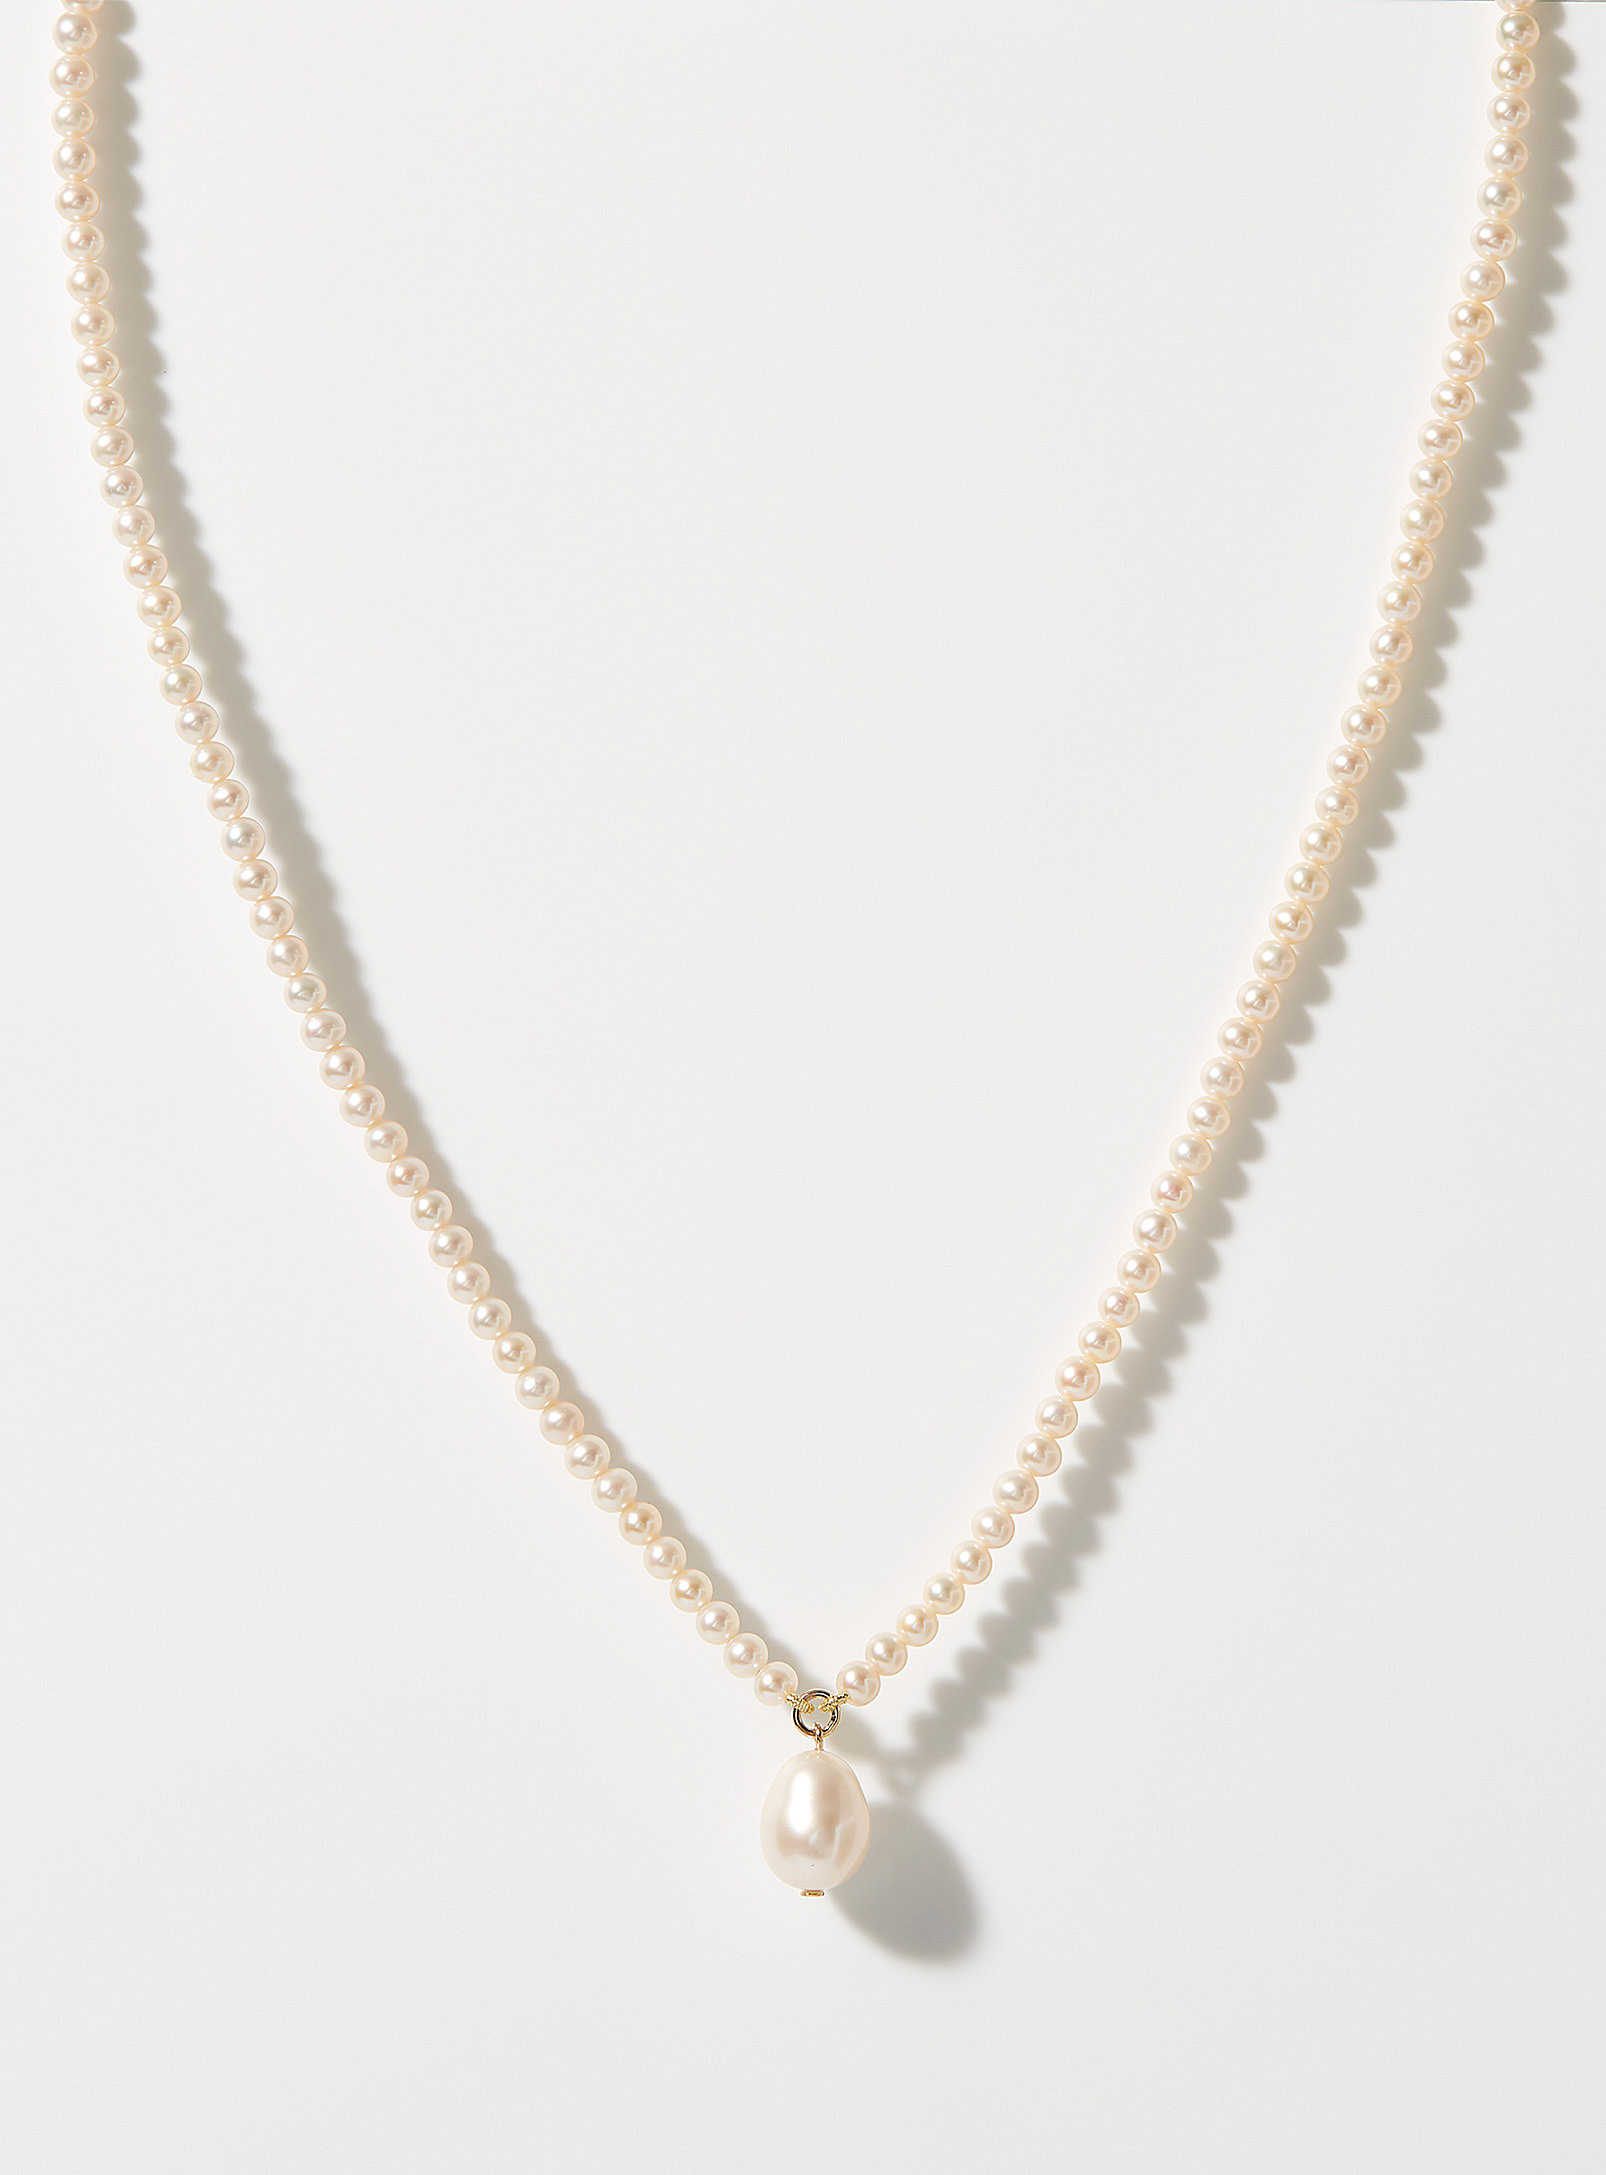 Poppy Finch Pearl Necklace In Patterned Yellow